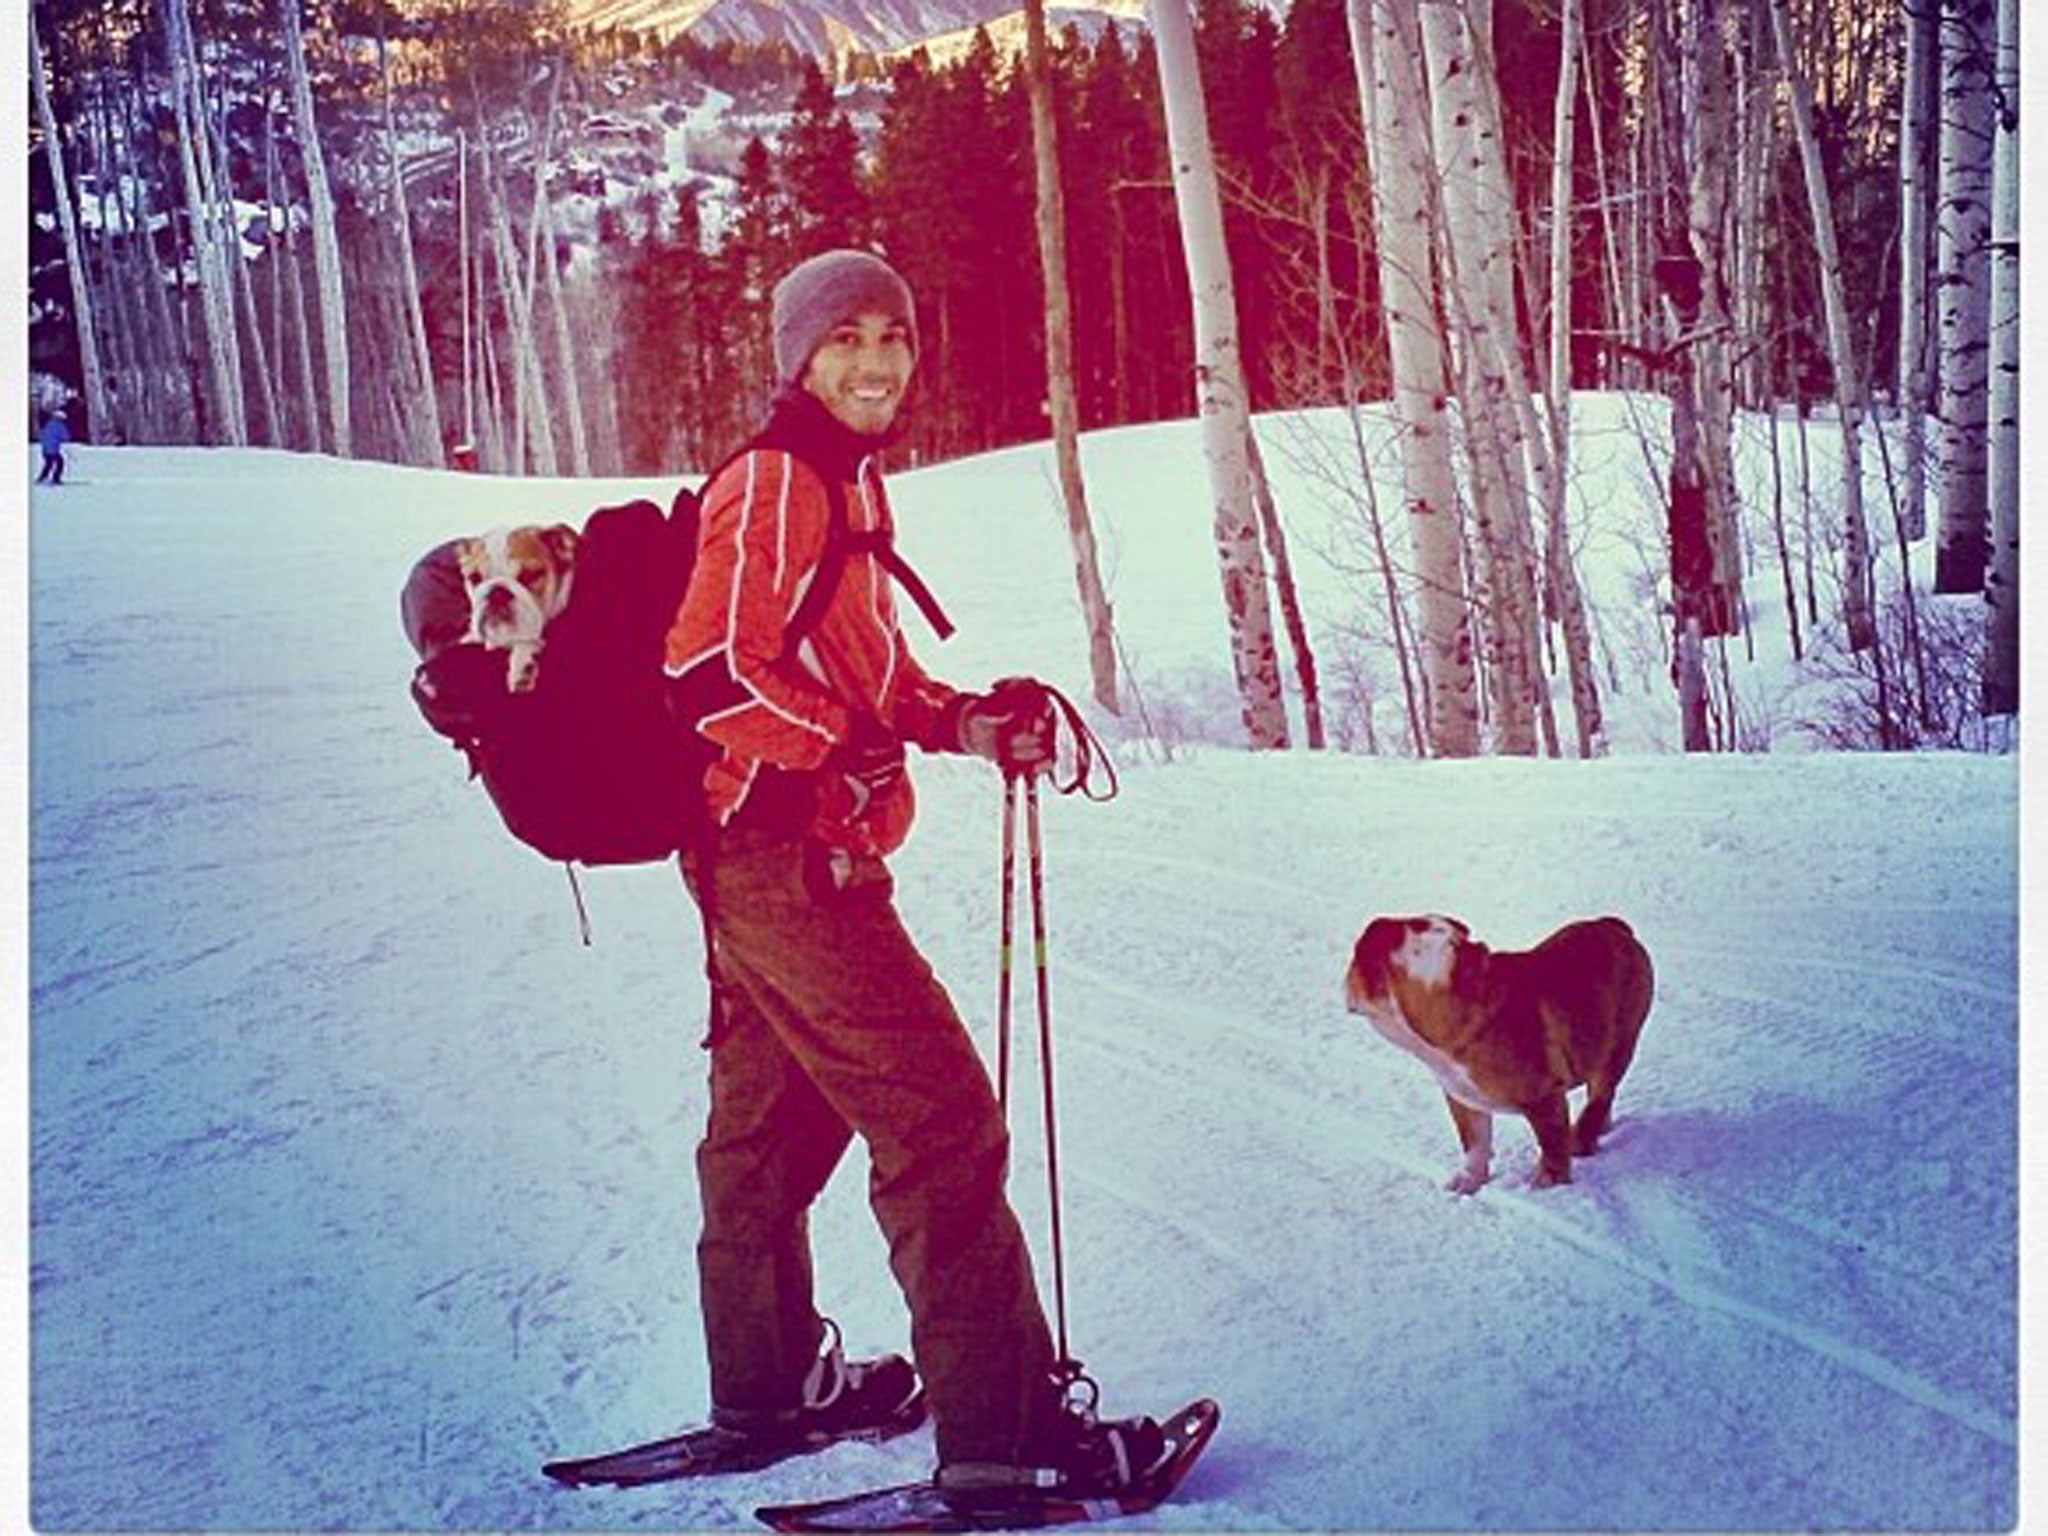 Lewis Hamilton has caused uproar among F1 fans after posting skiing holiday pictures in the wake of Michael Schumacher's accident